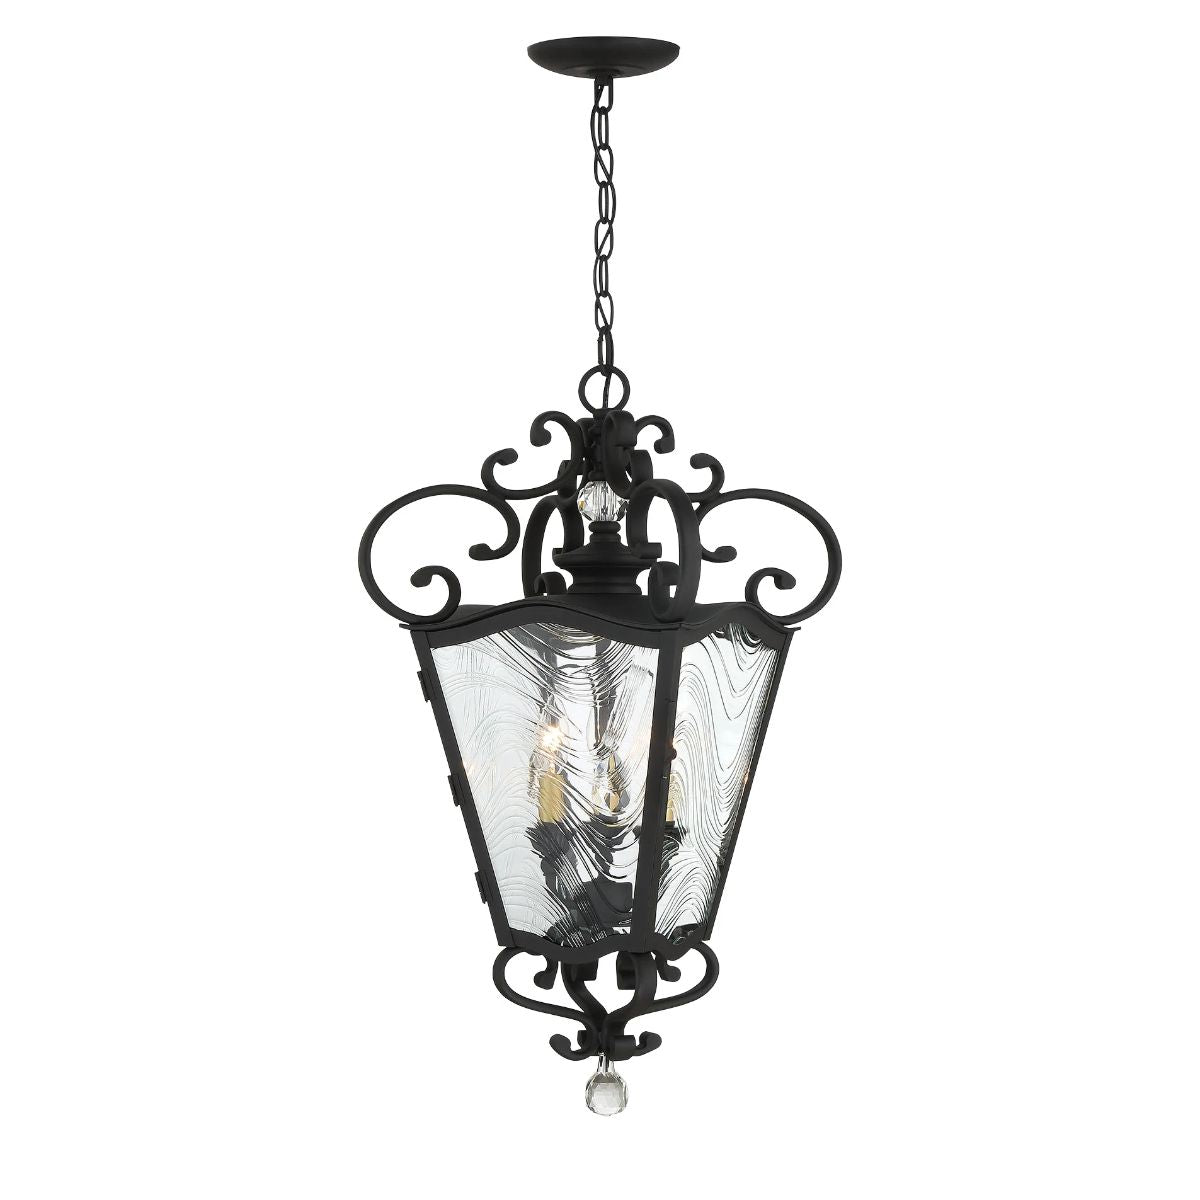 Brixton Ivey 3 lights 13 in. Outdoor Hanging Lantern Coal & Soft Brass finish